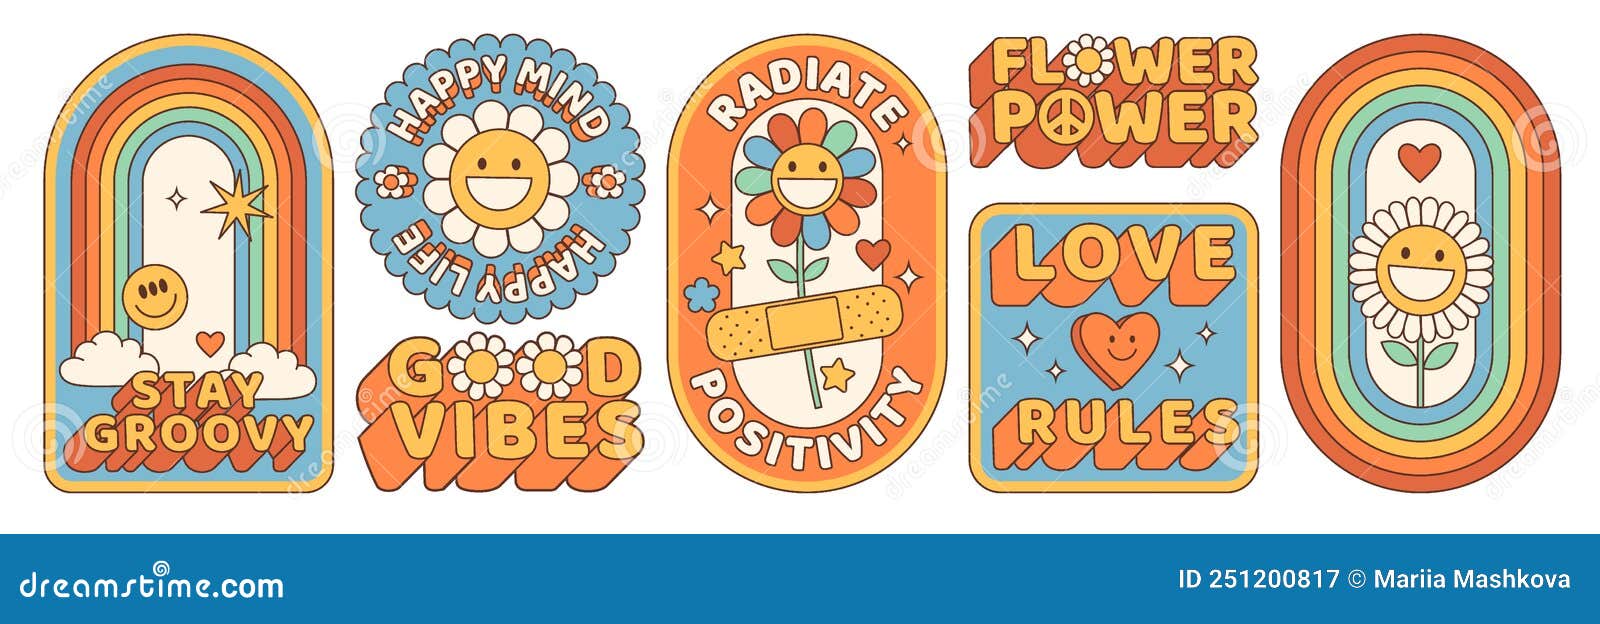 groovy hippie 70s stickers. funny cartoon flower, rainbow, peace, heart in retro psychedelic style.